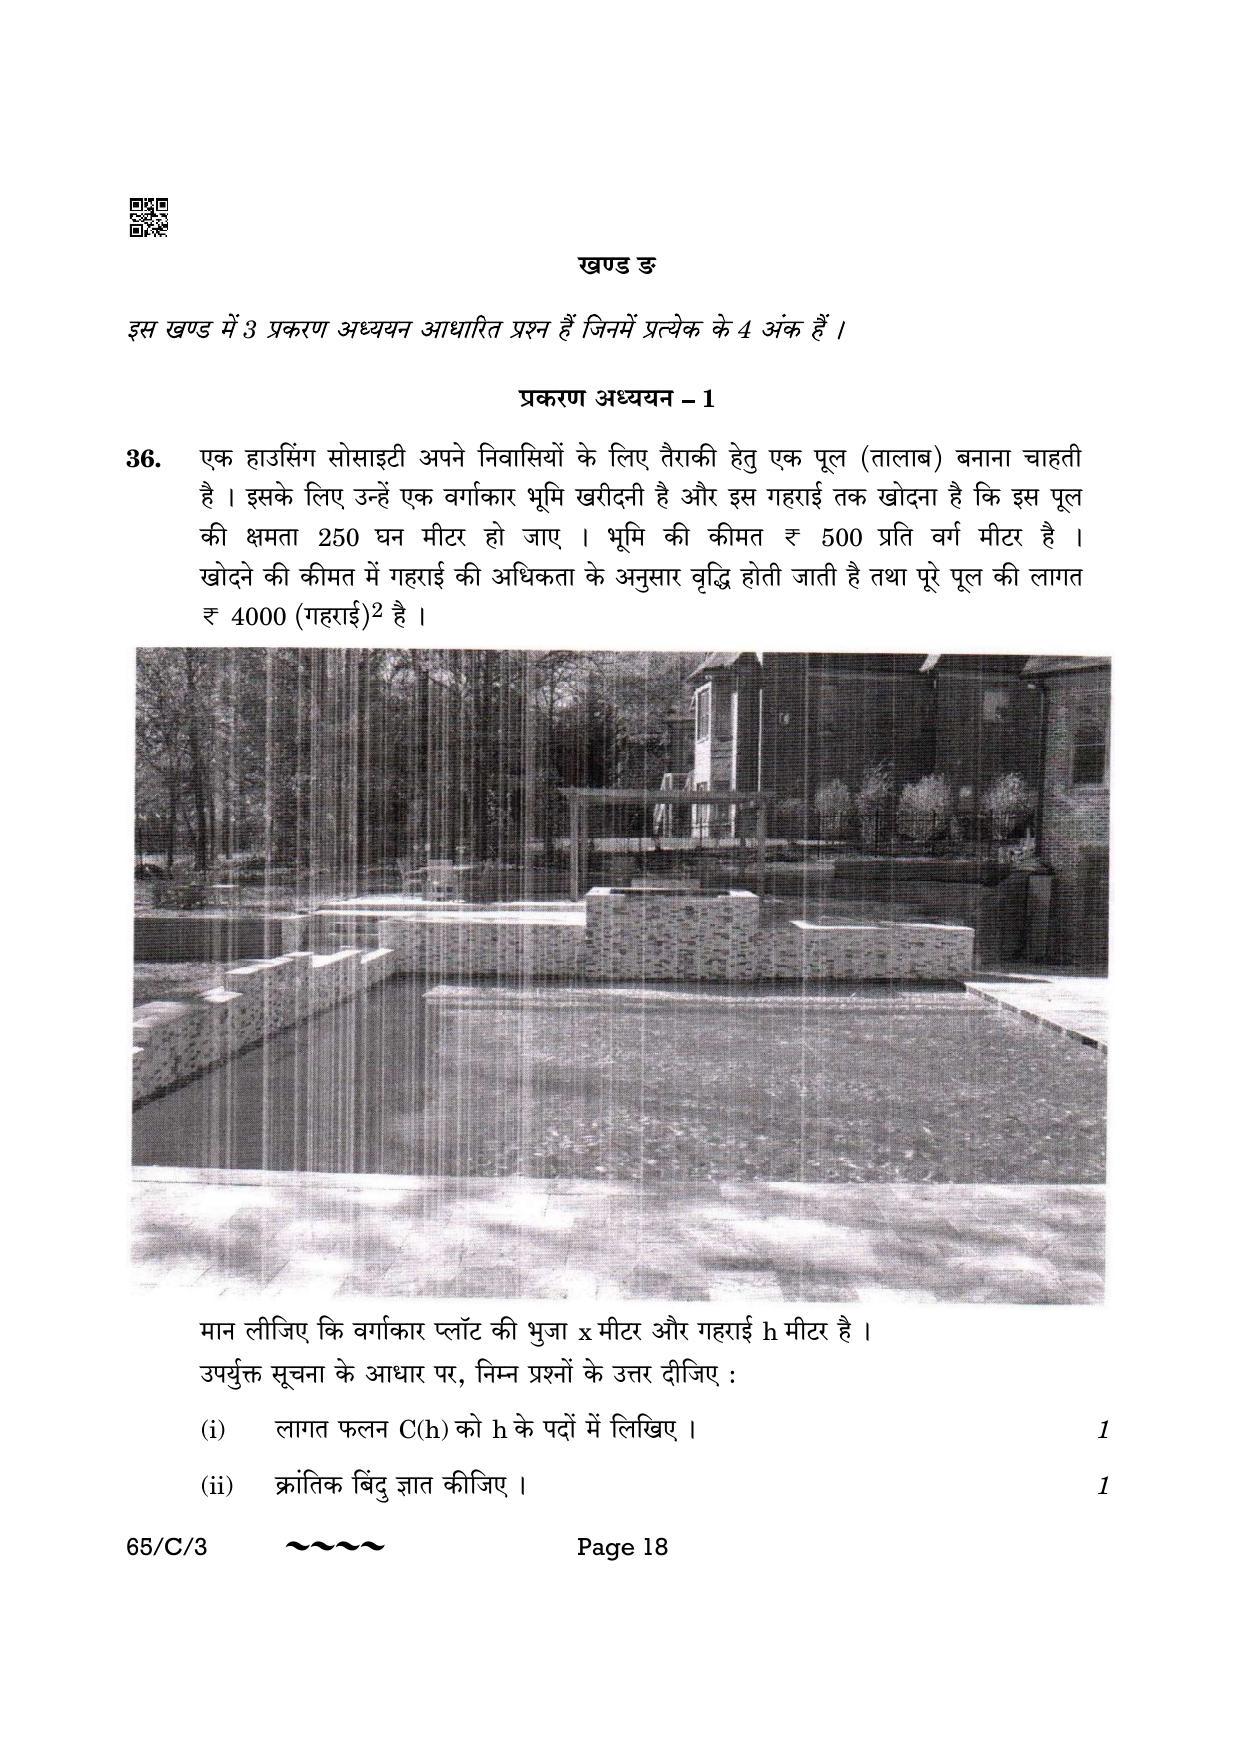 CBSE Class 12 65-3- Mathematics 2023 (Compartment) Question Paper - Page 18